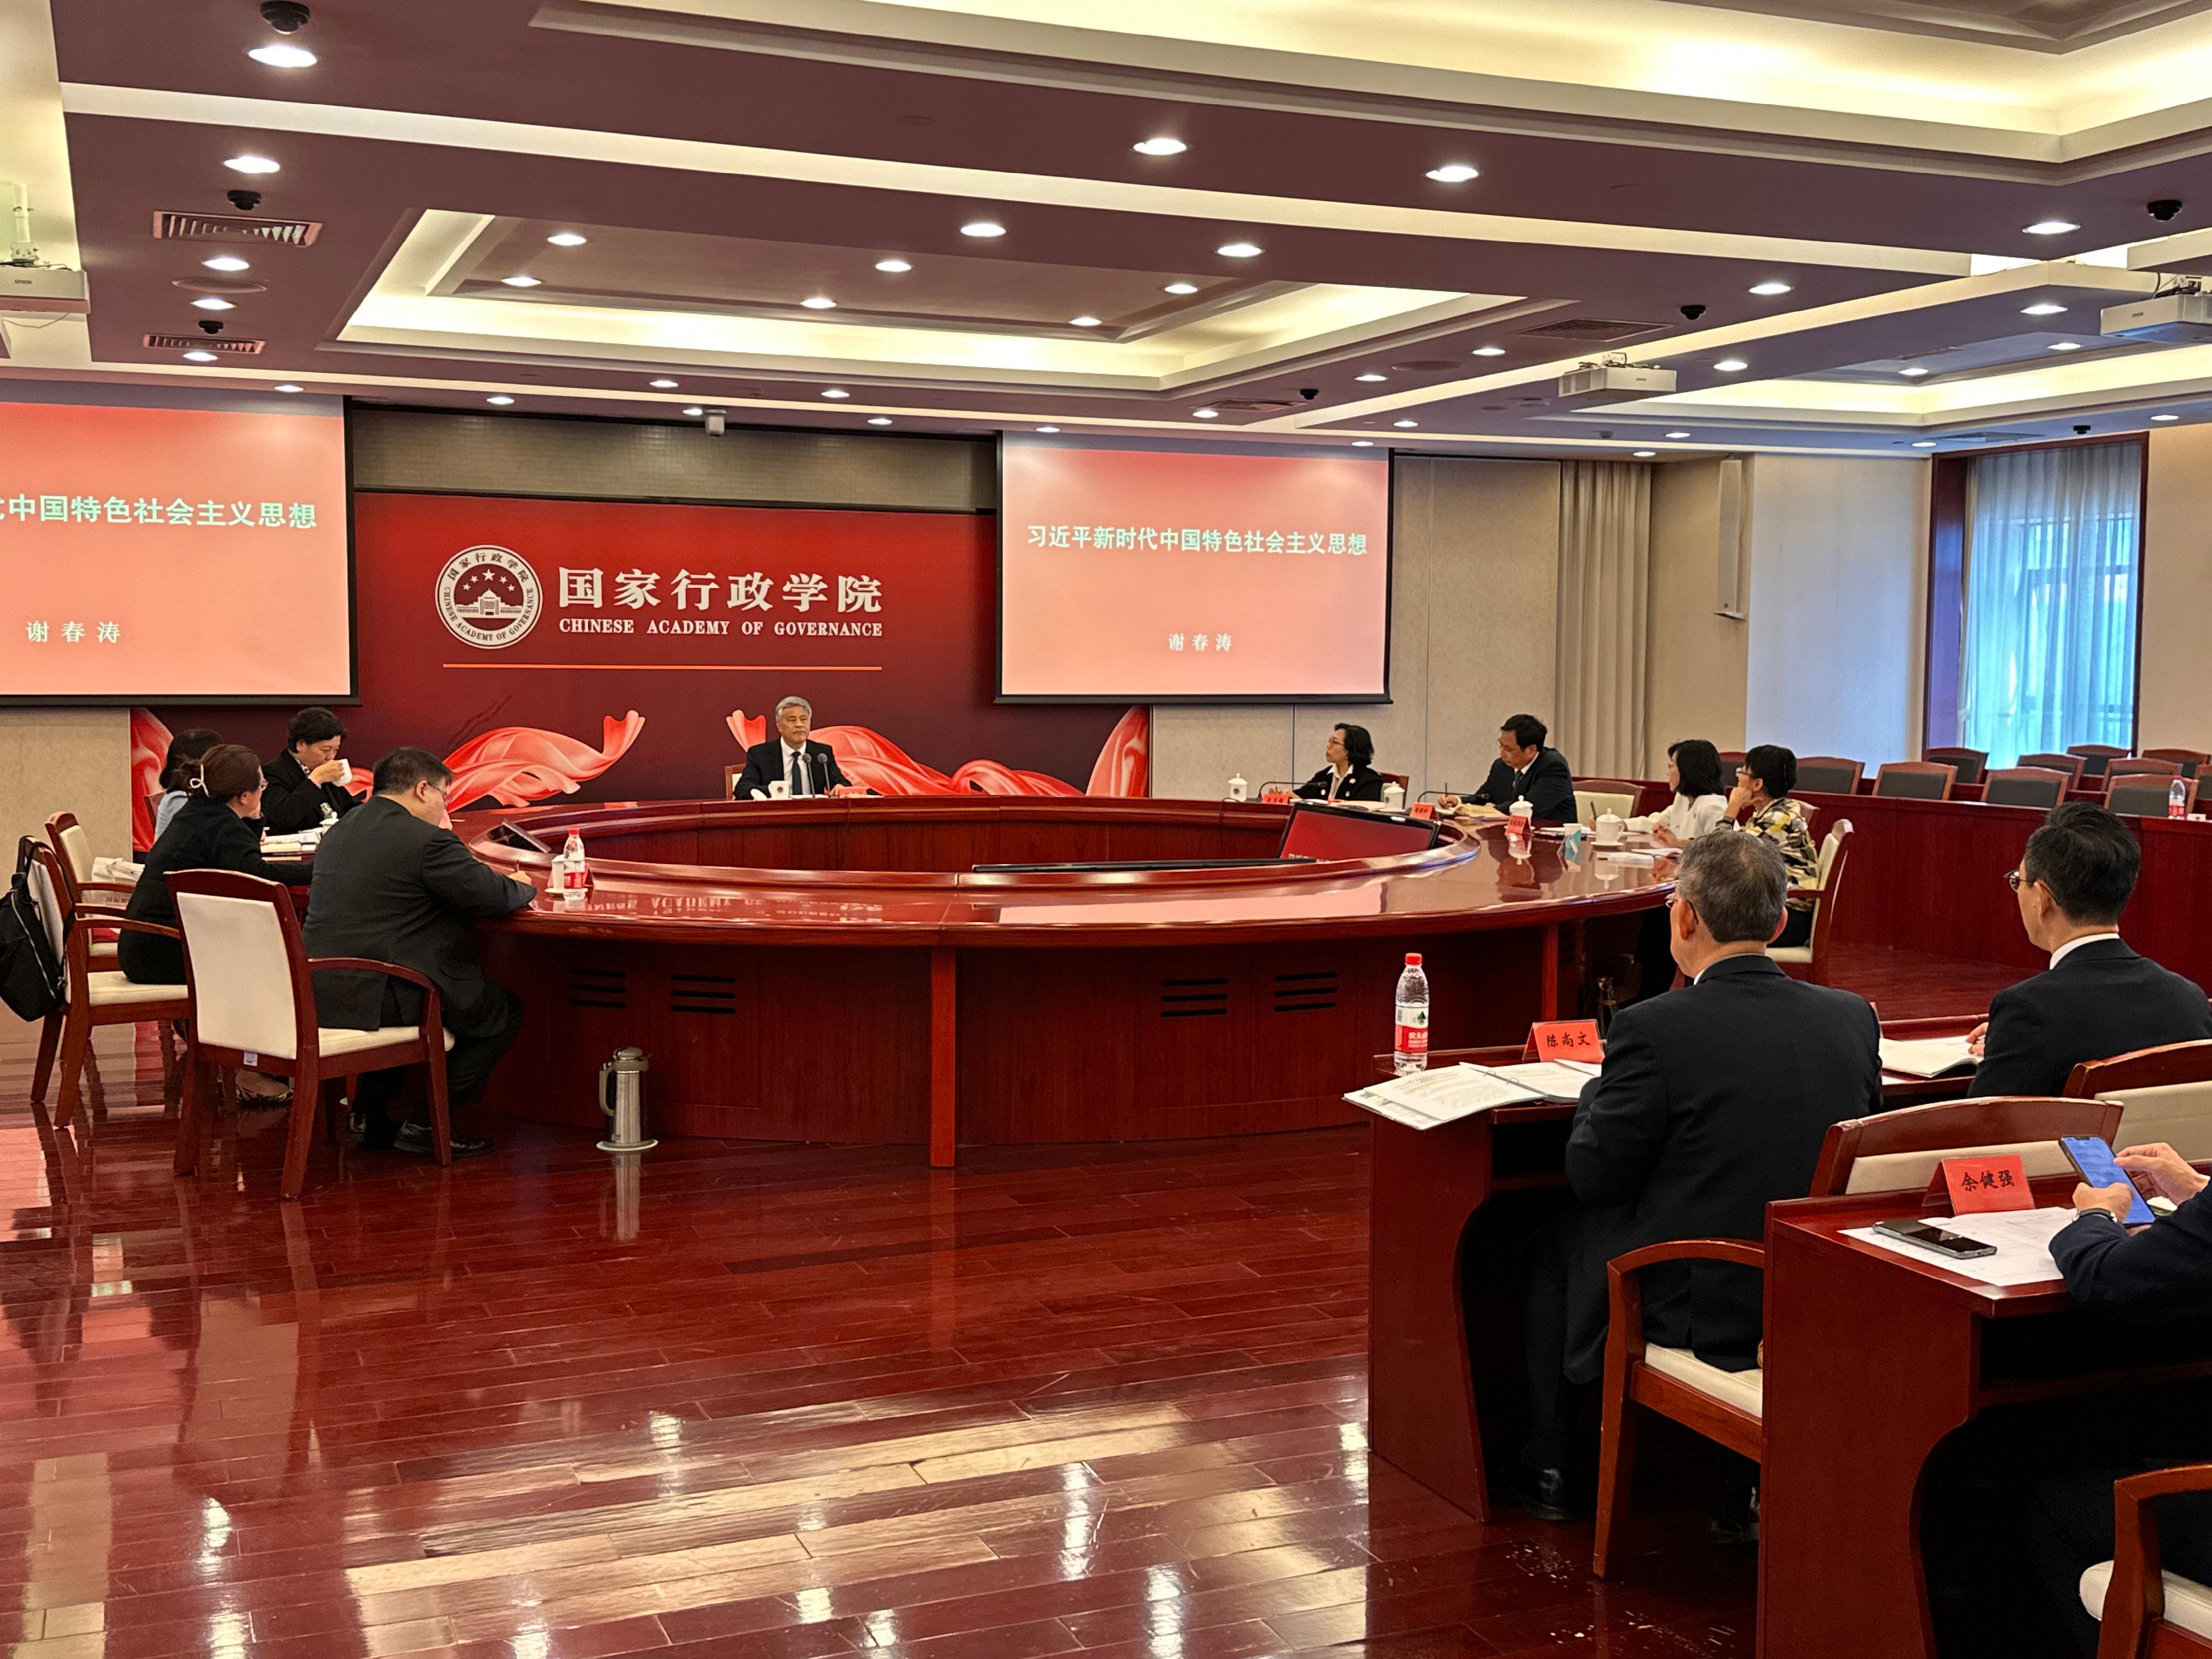 The Executive Vice President of the National Academy of Governance, Mr Xie Chuntao (centre) today (April 17) gave lecture on the Xi Jinping Thought on Socialism with Chinese Characteristics for a New Era to the delegation of the District Officers of the Hong Kong Special Administrative Region Government for a study programme on district governance.